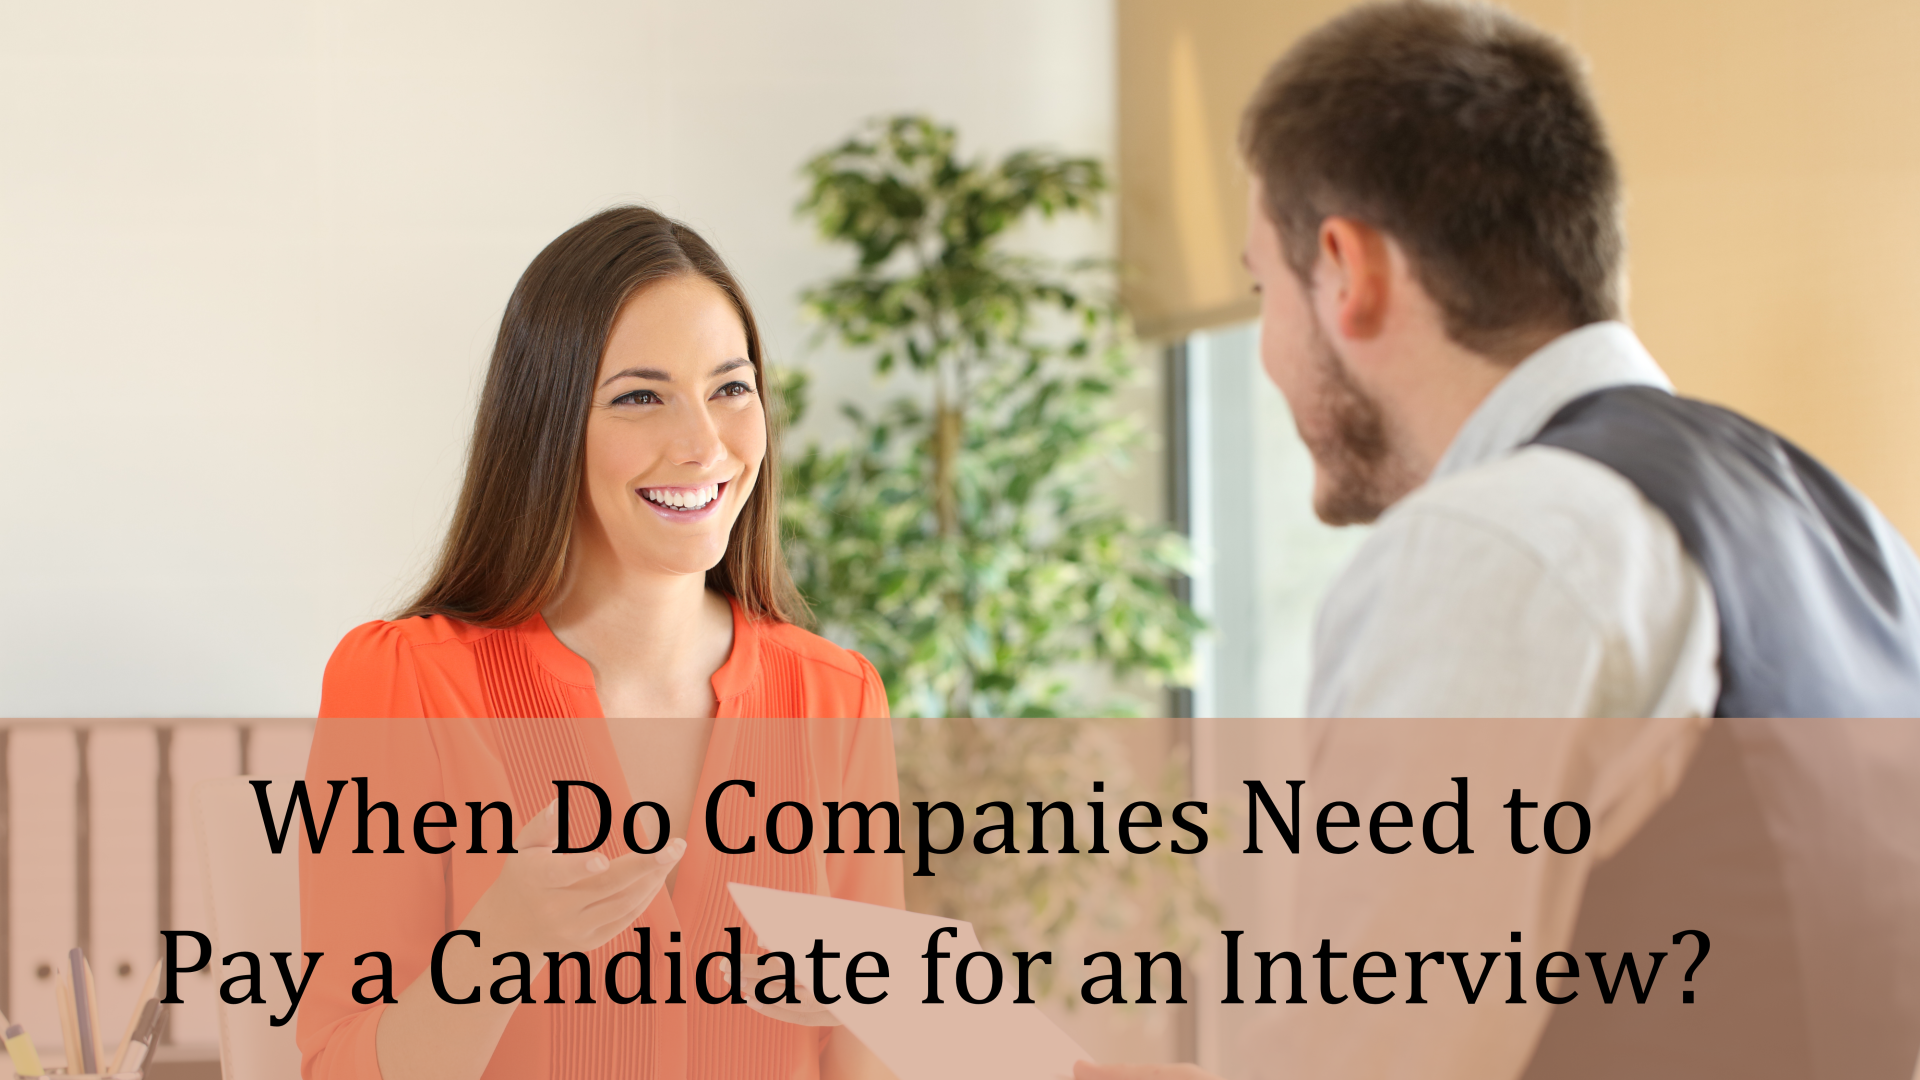 When do companies need to pay a candidate for an interview